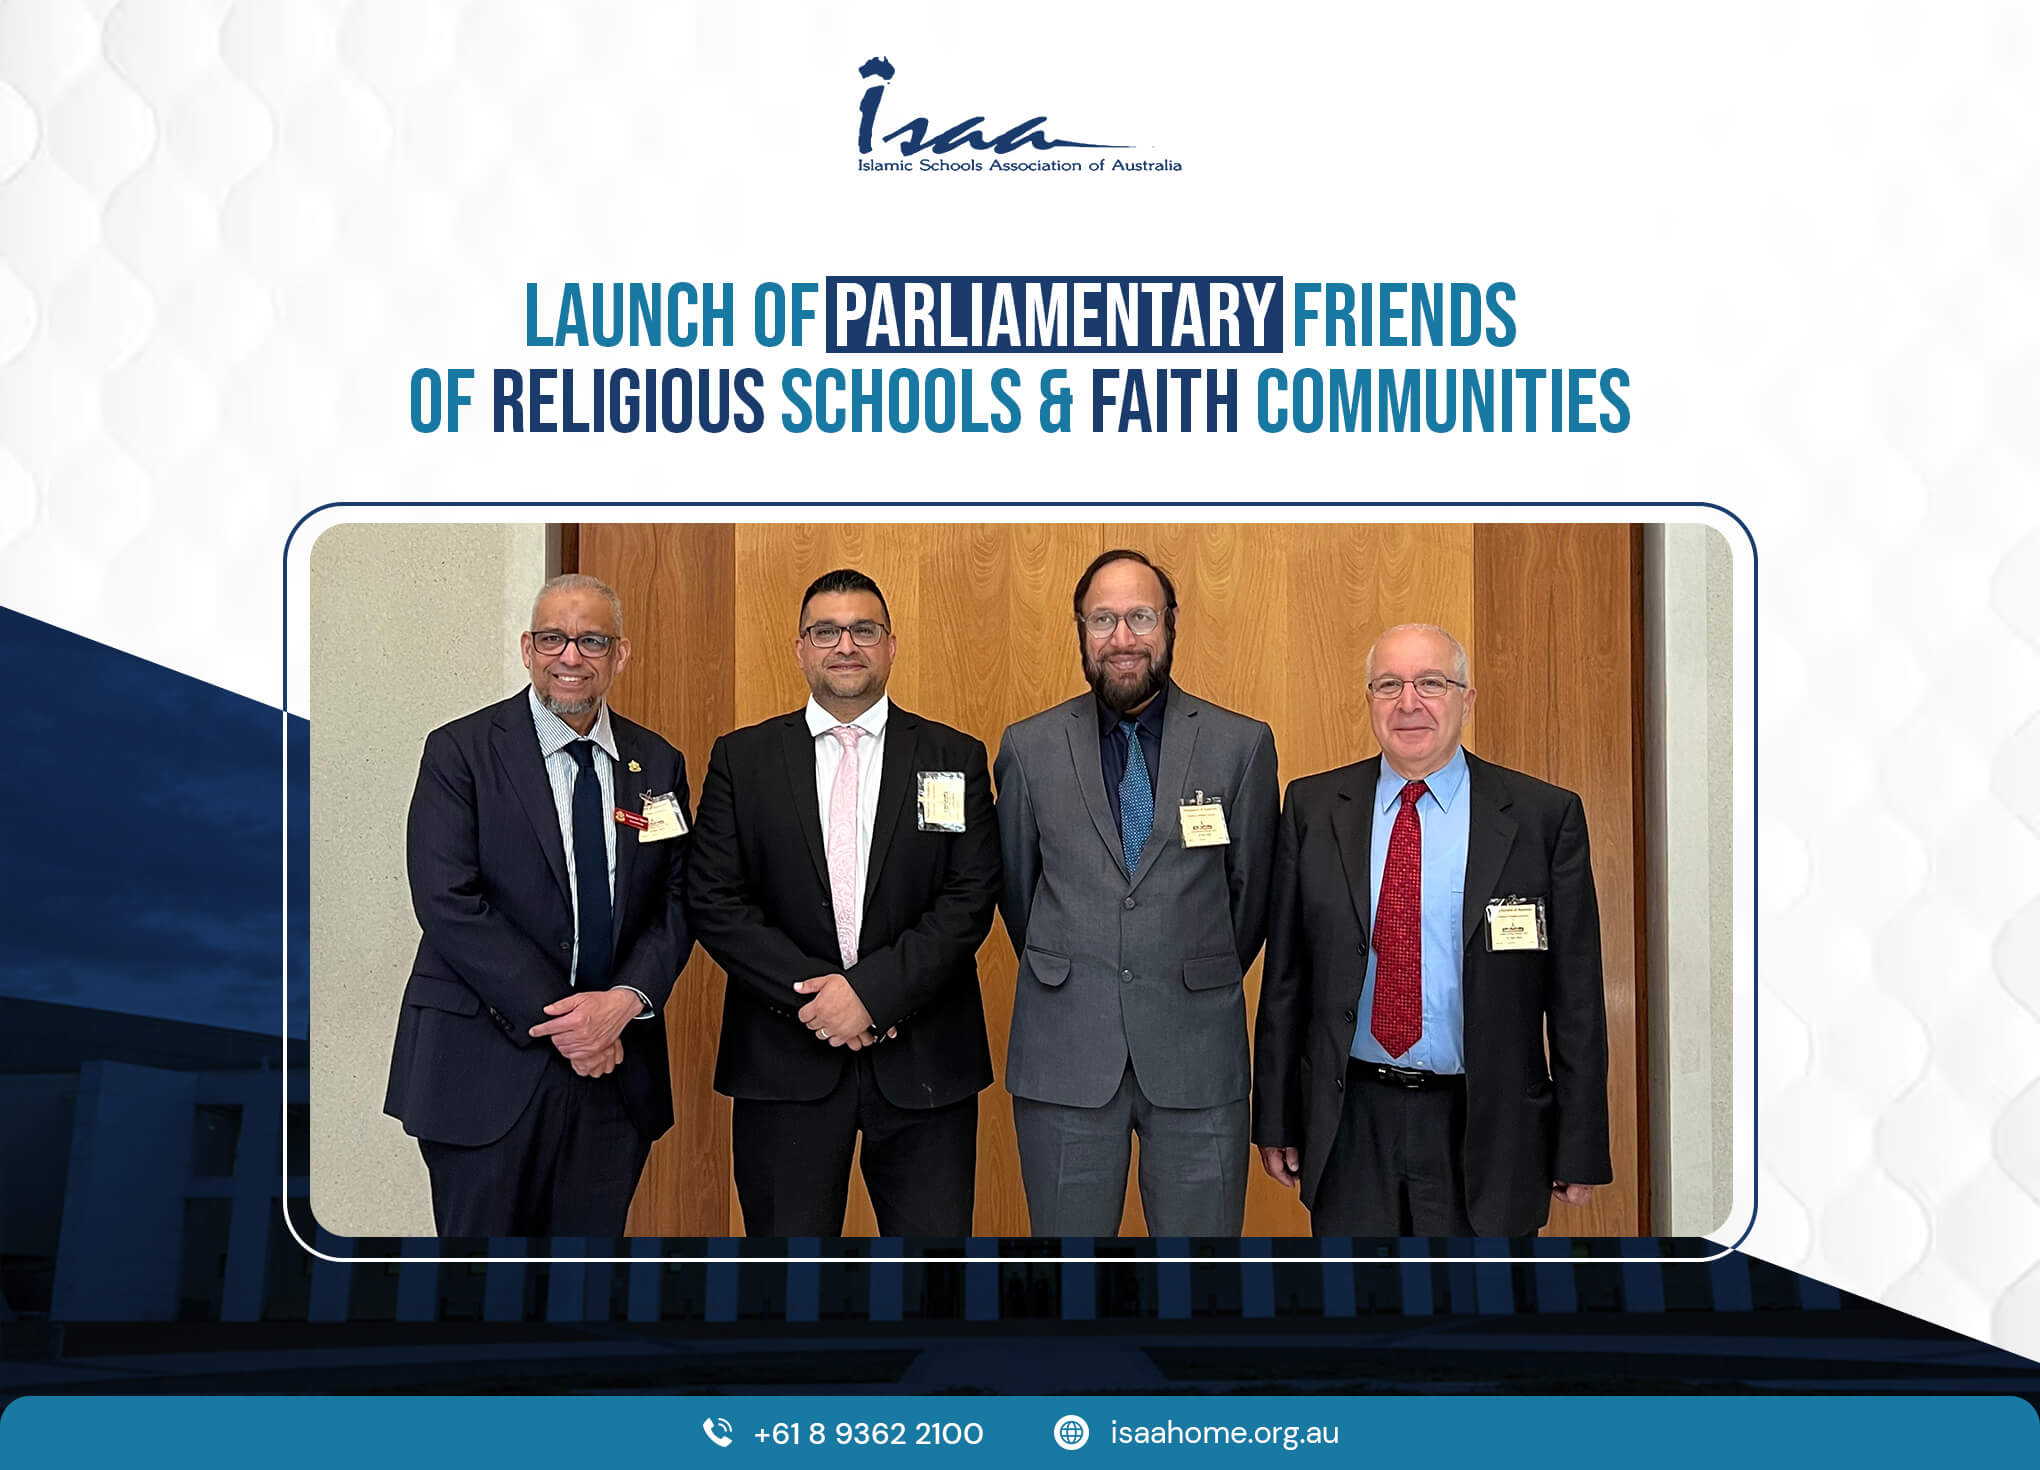 Historic Collaboration Launches Parliamentary Friends of Religious Schools & Faith Communities